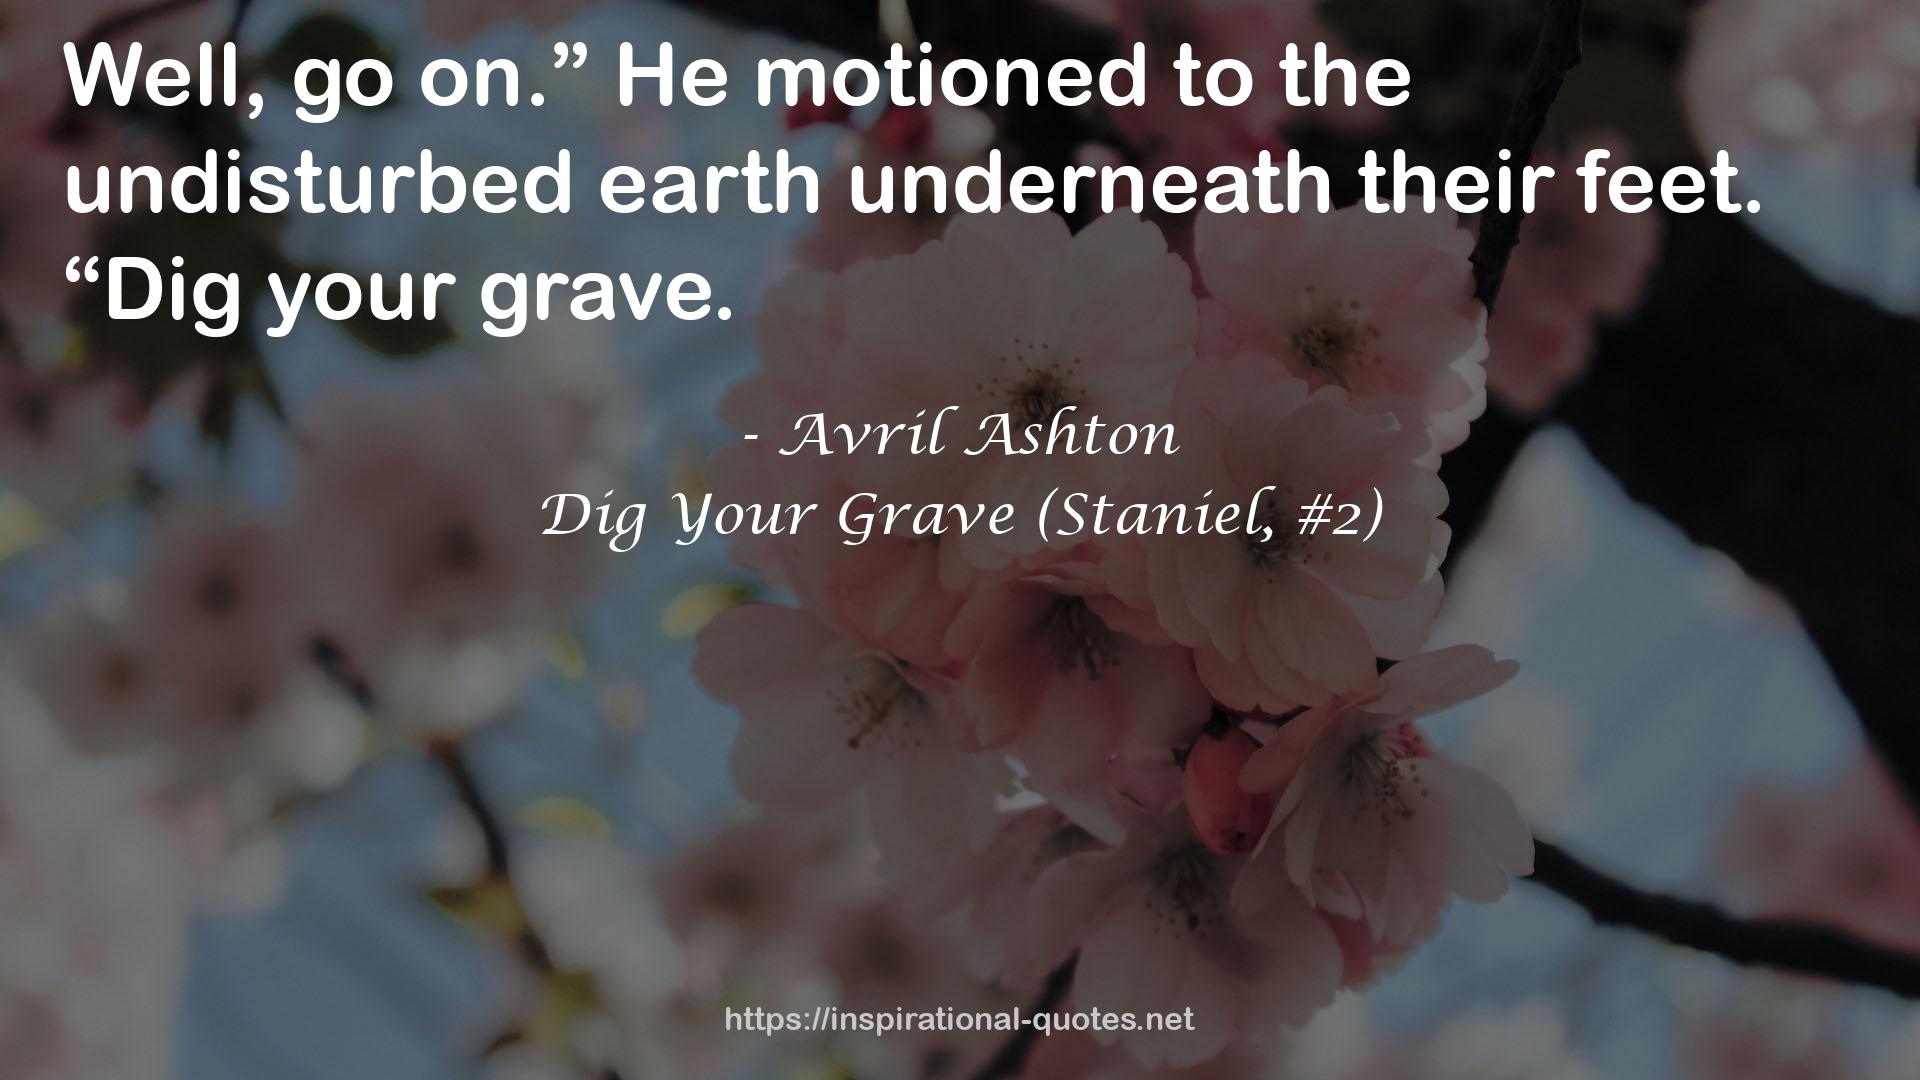 Dig Your Grave (Staniel, #2) QUOTES